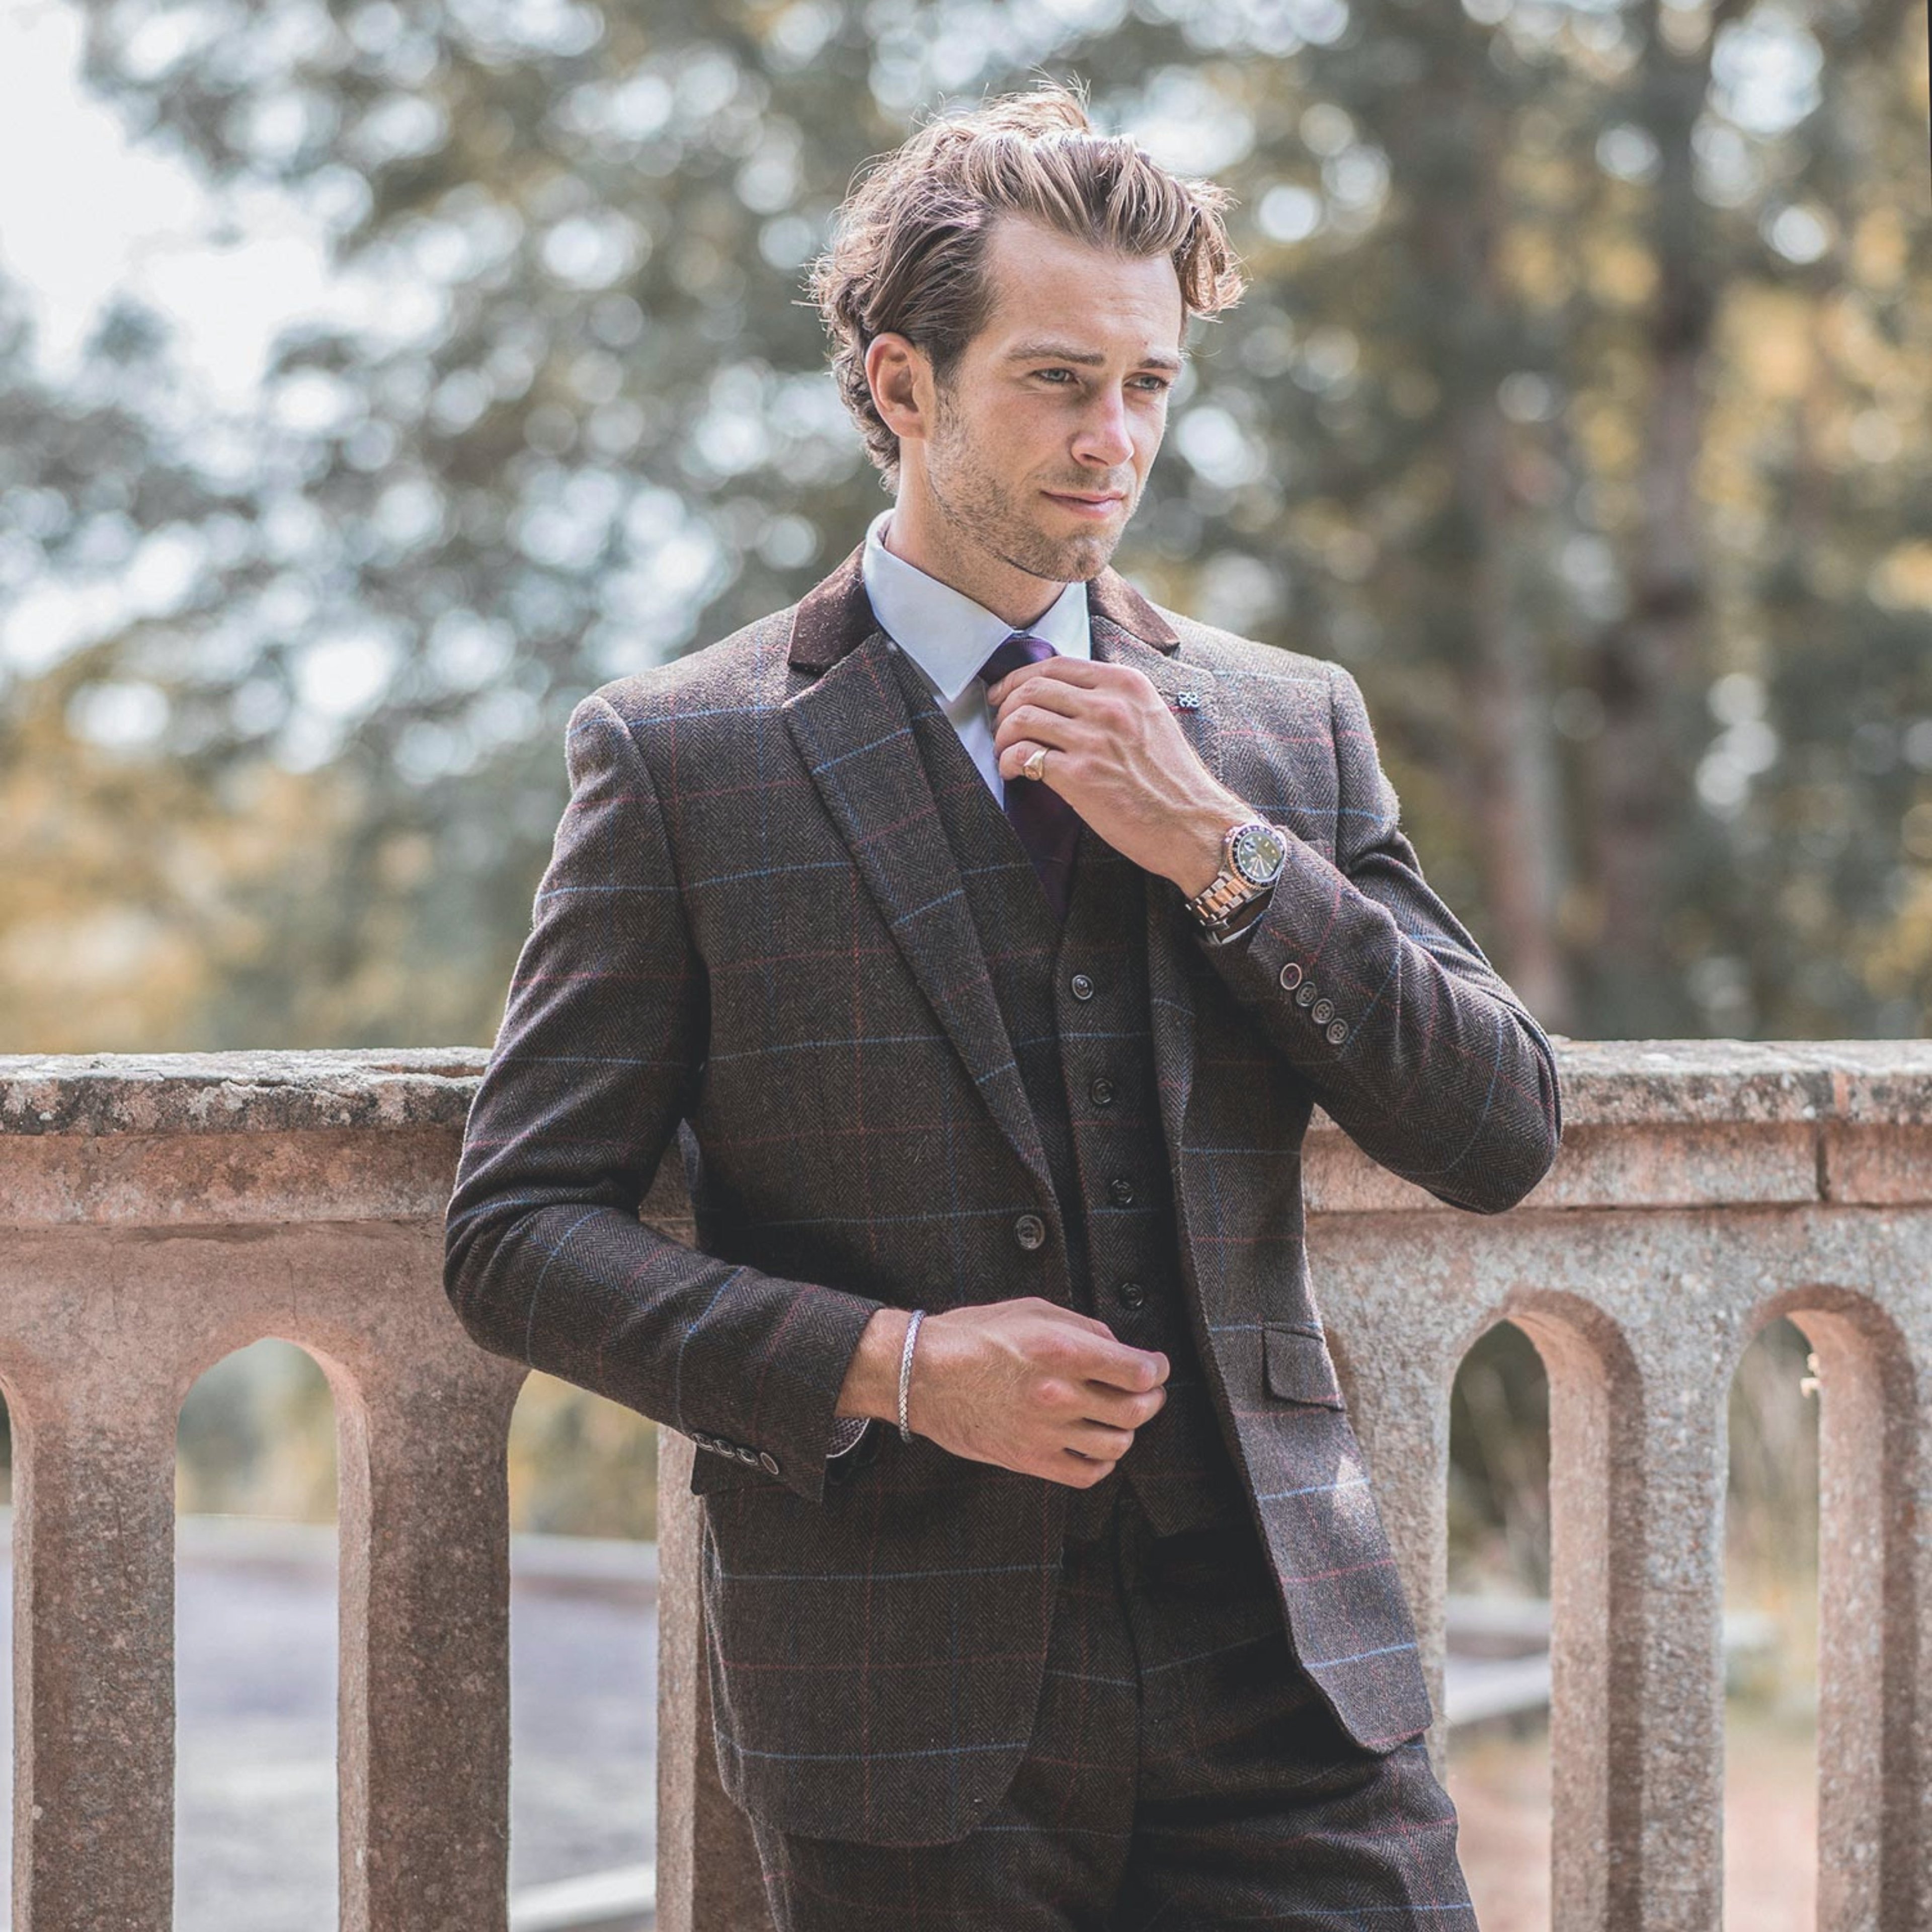 3-Piece Suits: A Man's Guide to Style and Fit